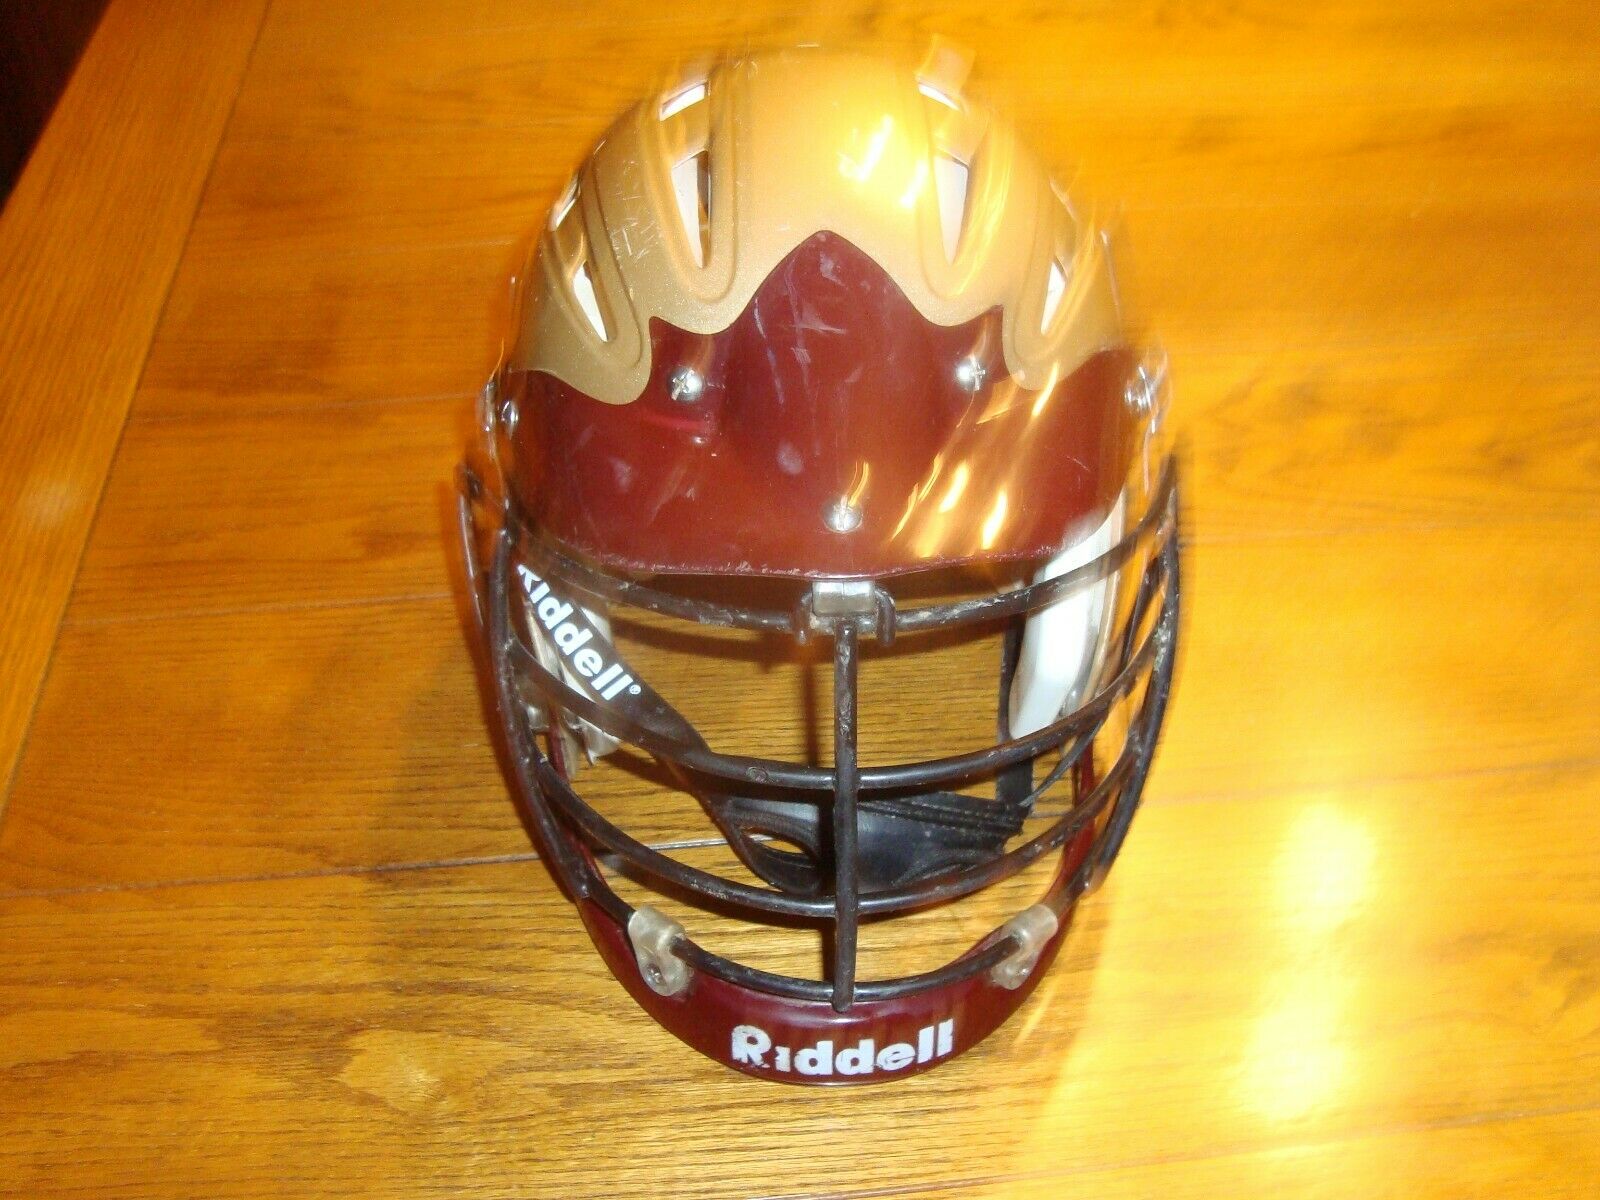 Riddell Lacrosse Helmet Size Adult Large Gold & Maroon Good Condition